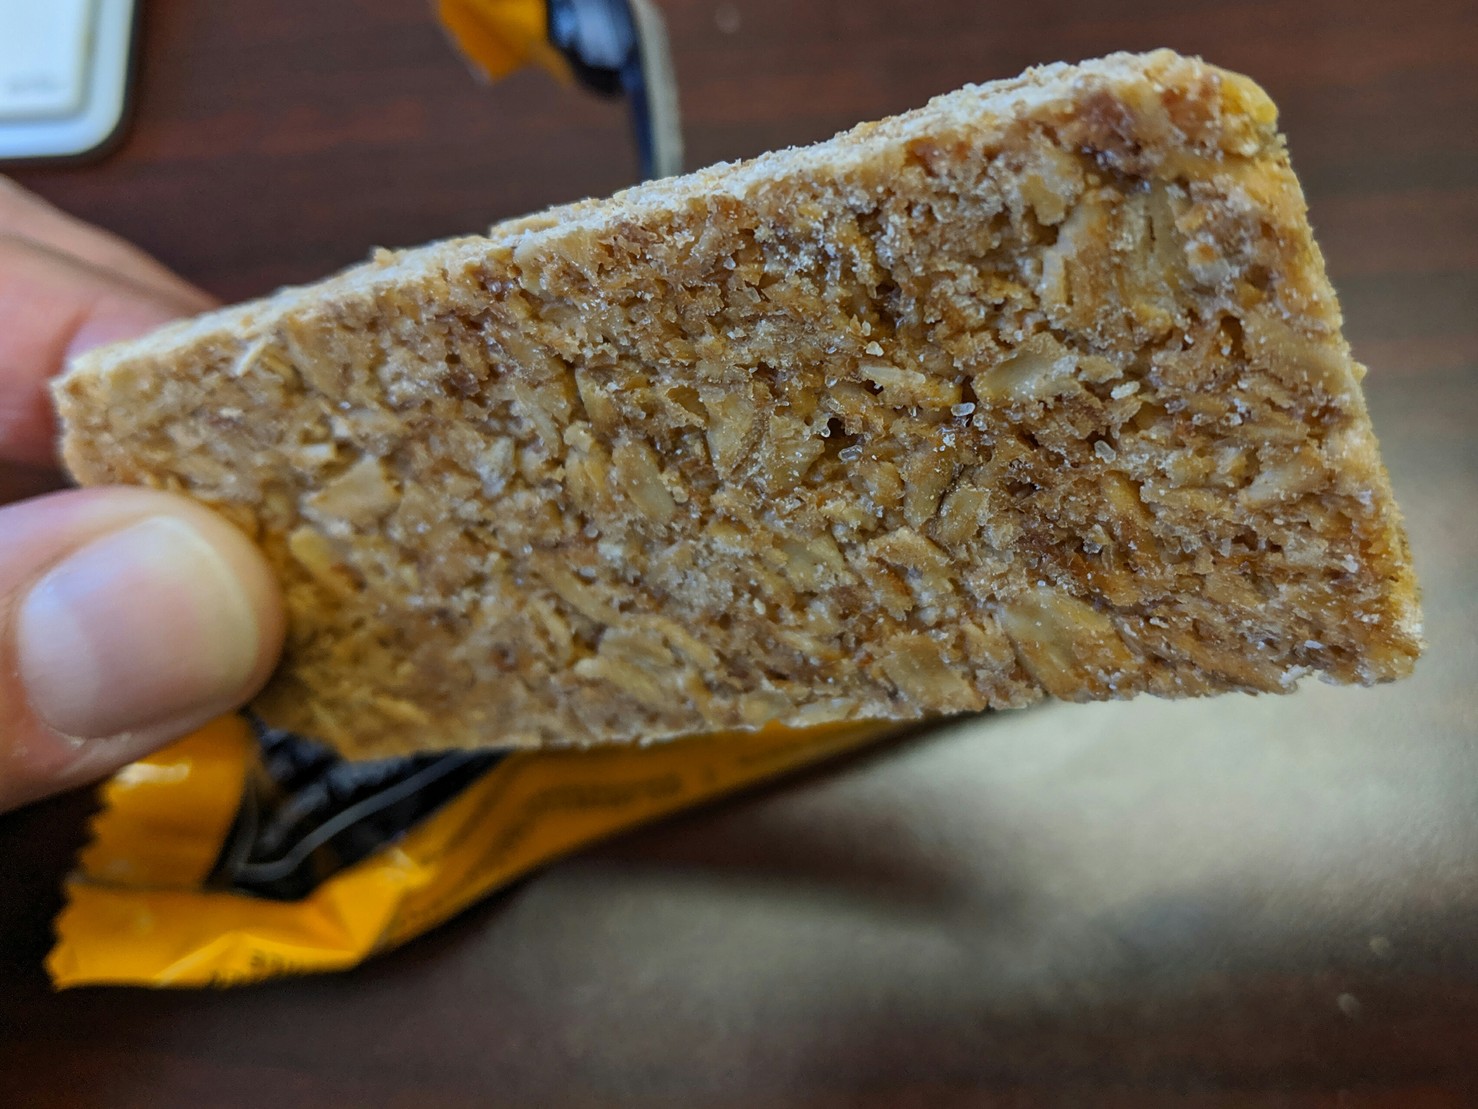 This granola bar looks disturbingly like a small piece of thin chipboard.